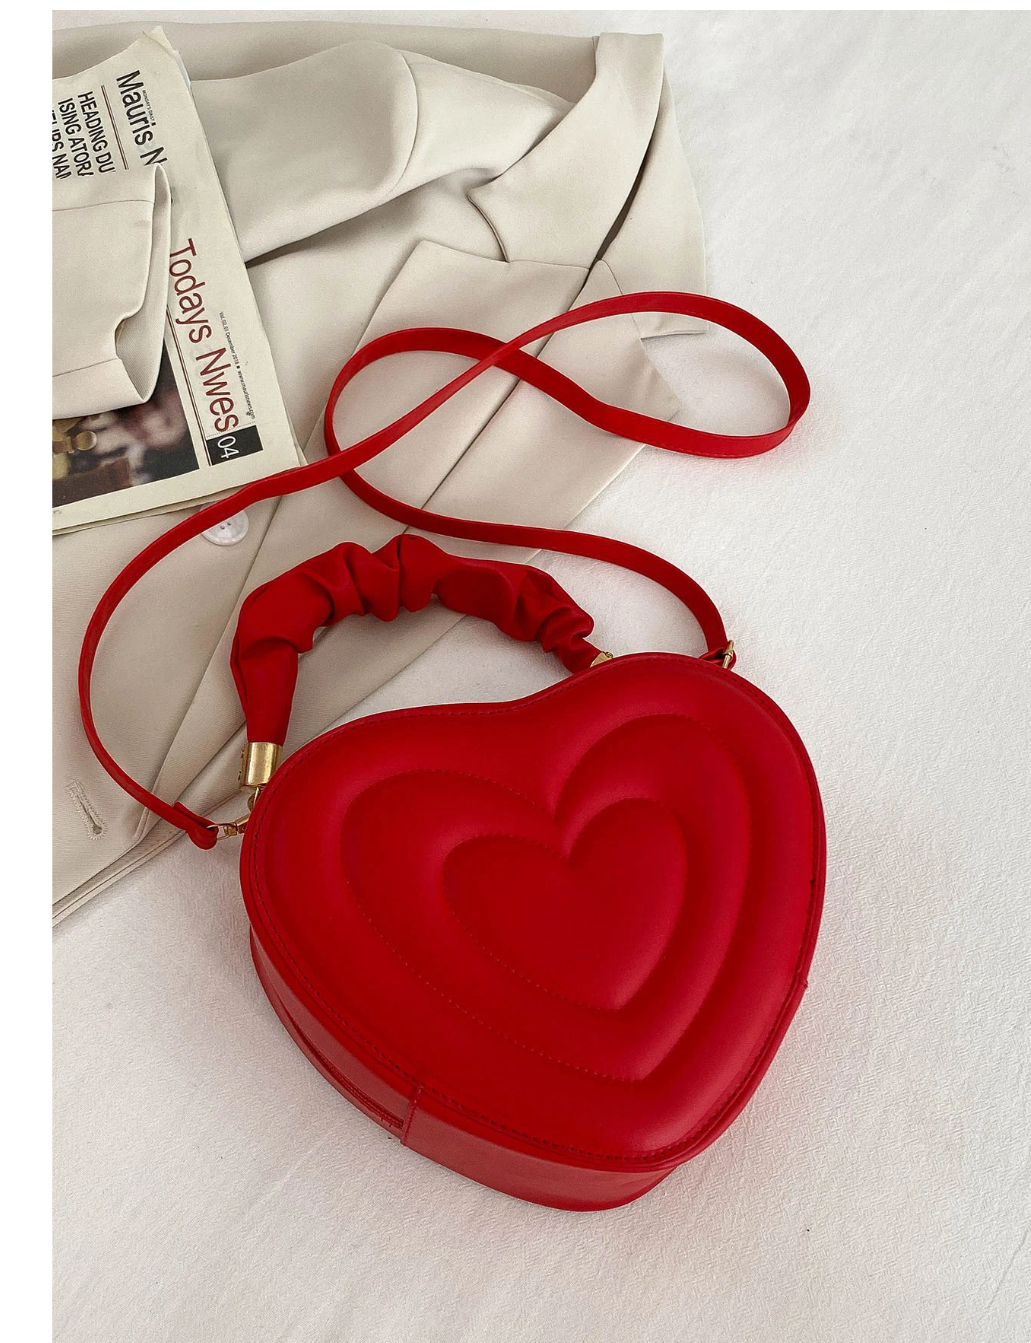 Heartfelt Chic: Trendy Heart Design Novelty Bag - The Perfect Match for Every Occasion!